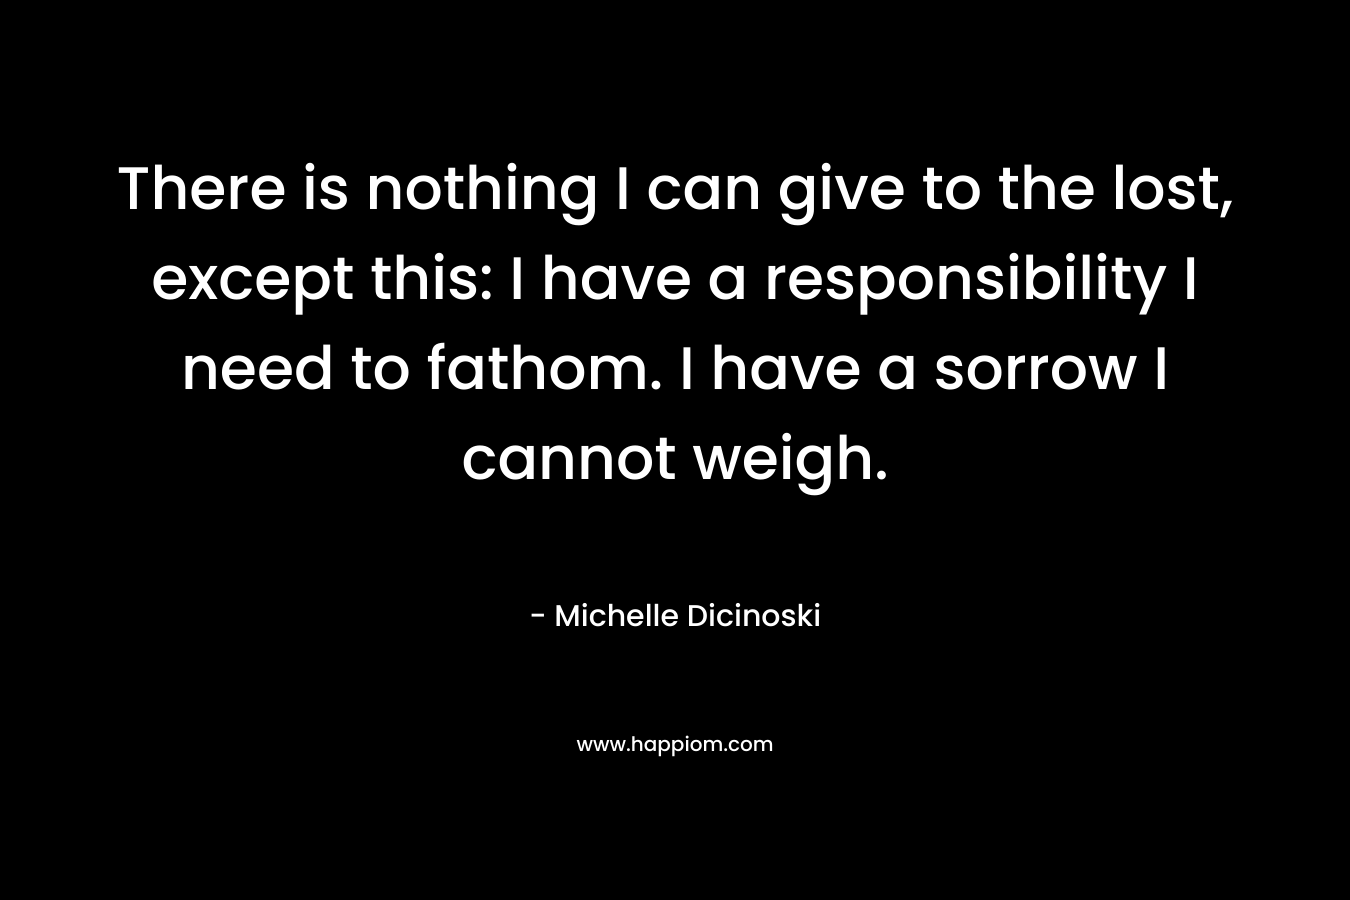 There is nothing I can give to the lost, except this: I have a responsibility I need to fathom. I have a sorrow I cannot weigh. – Michelle Dicinoski